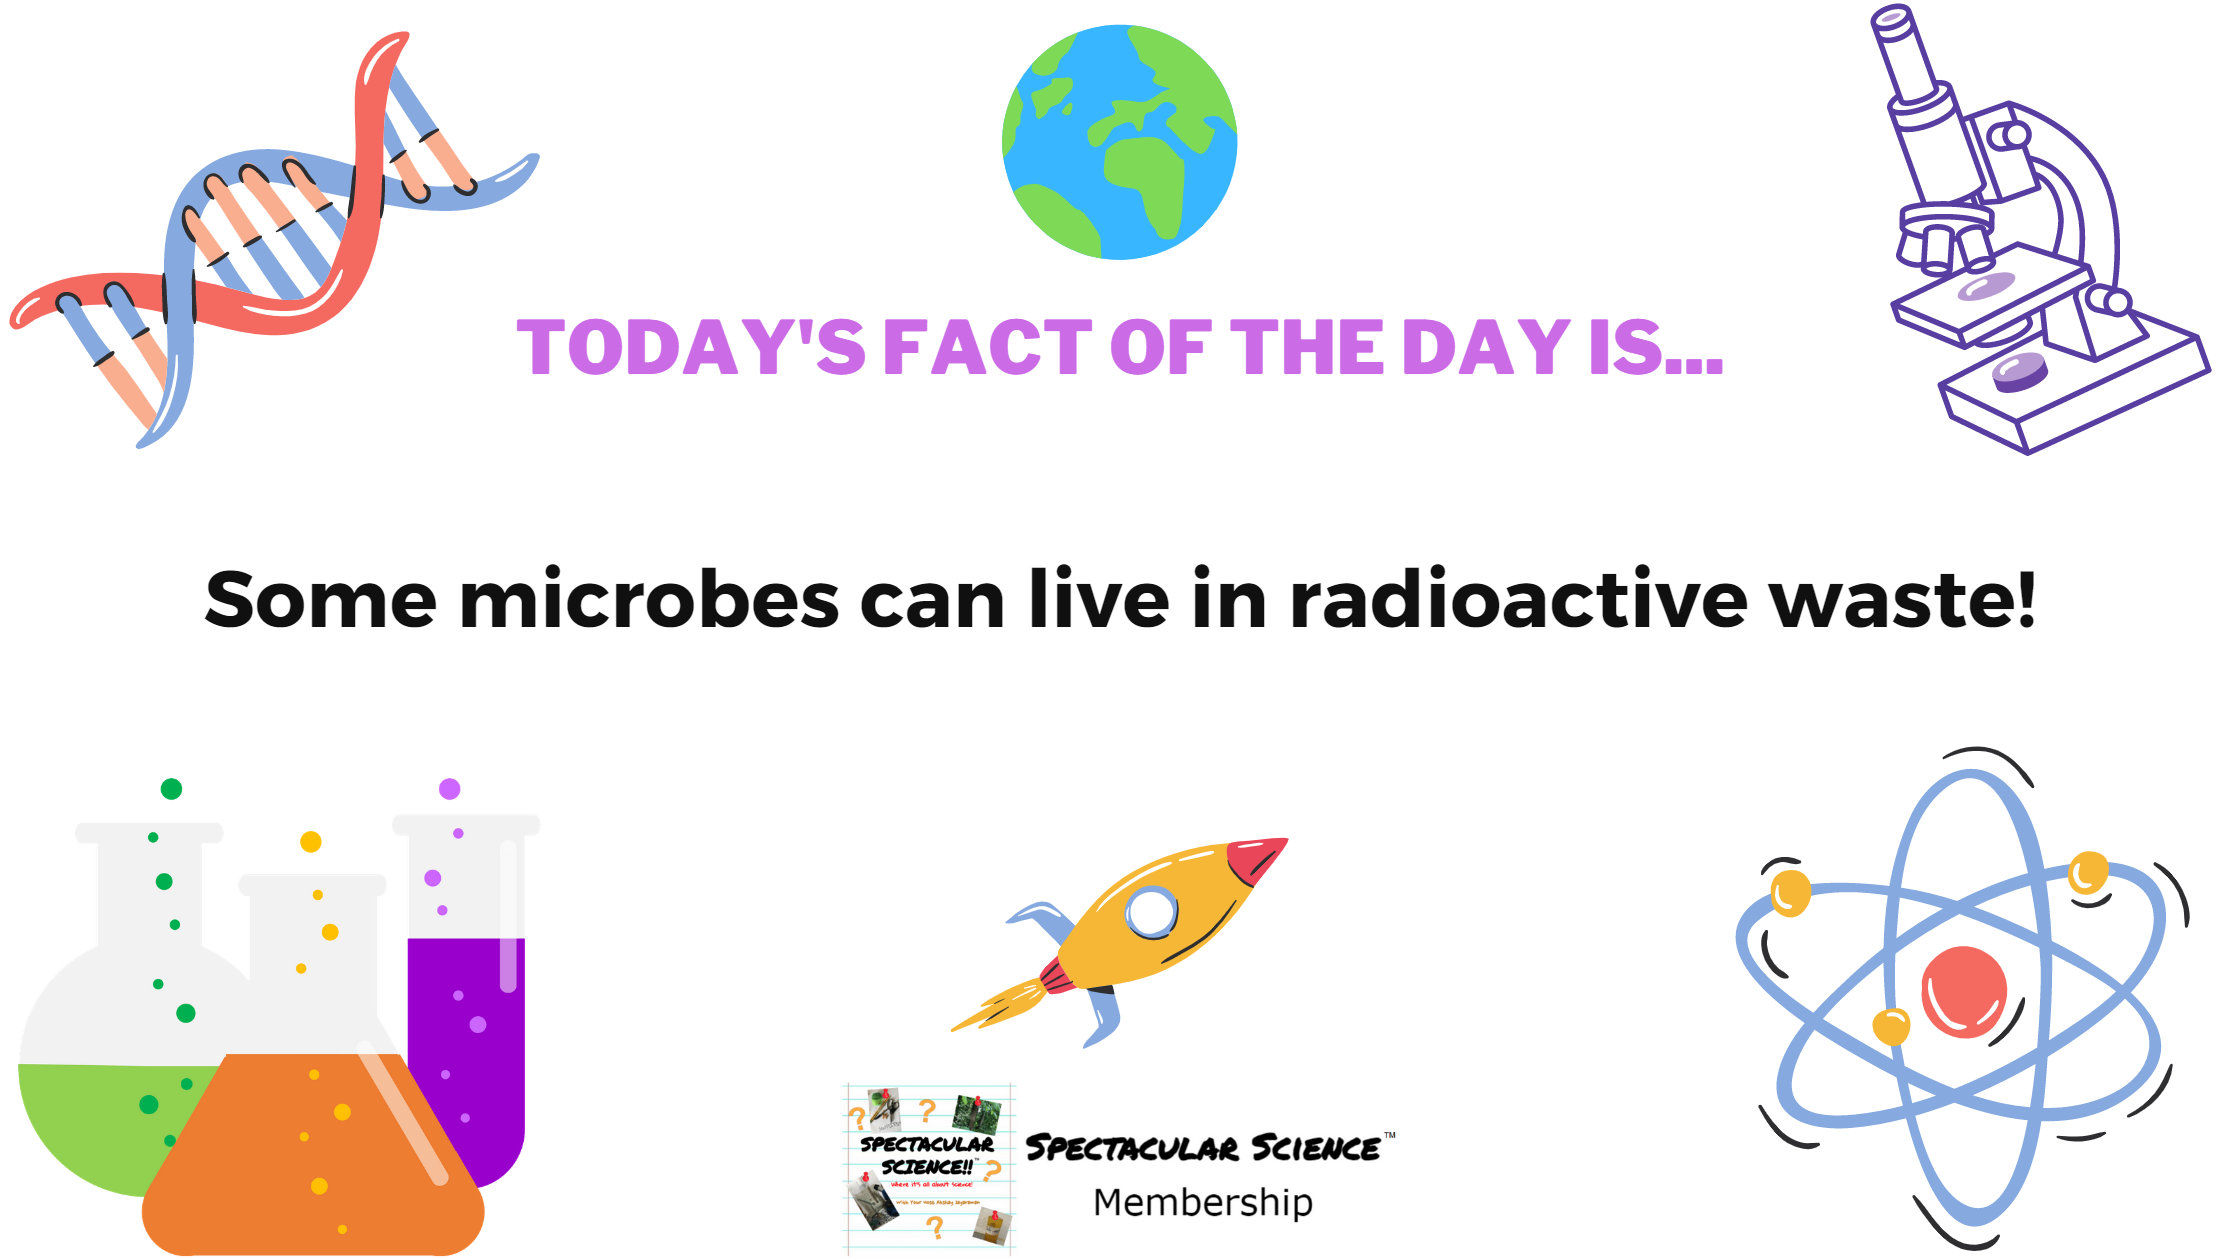 Fact of the Day Image February 3rd